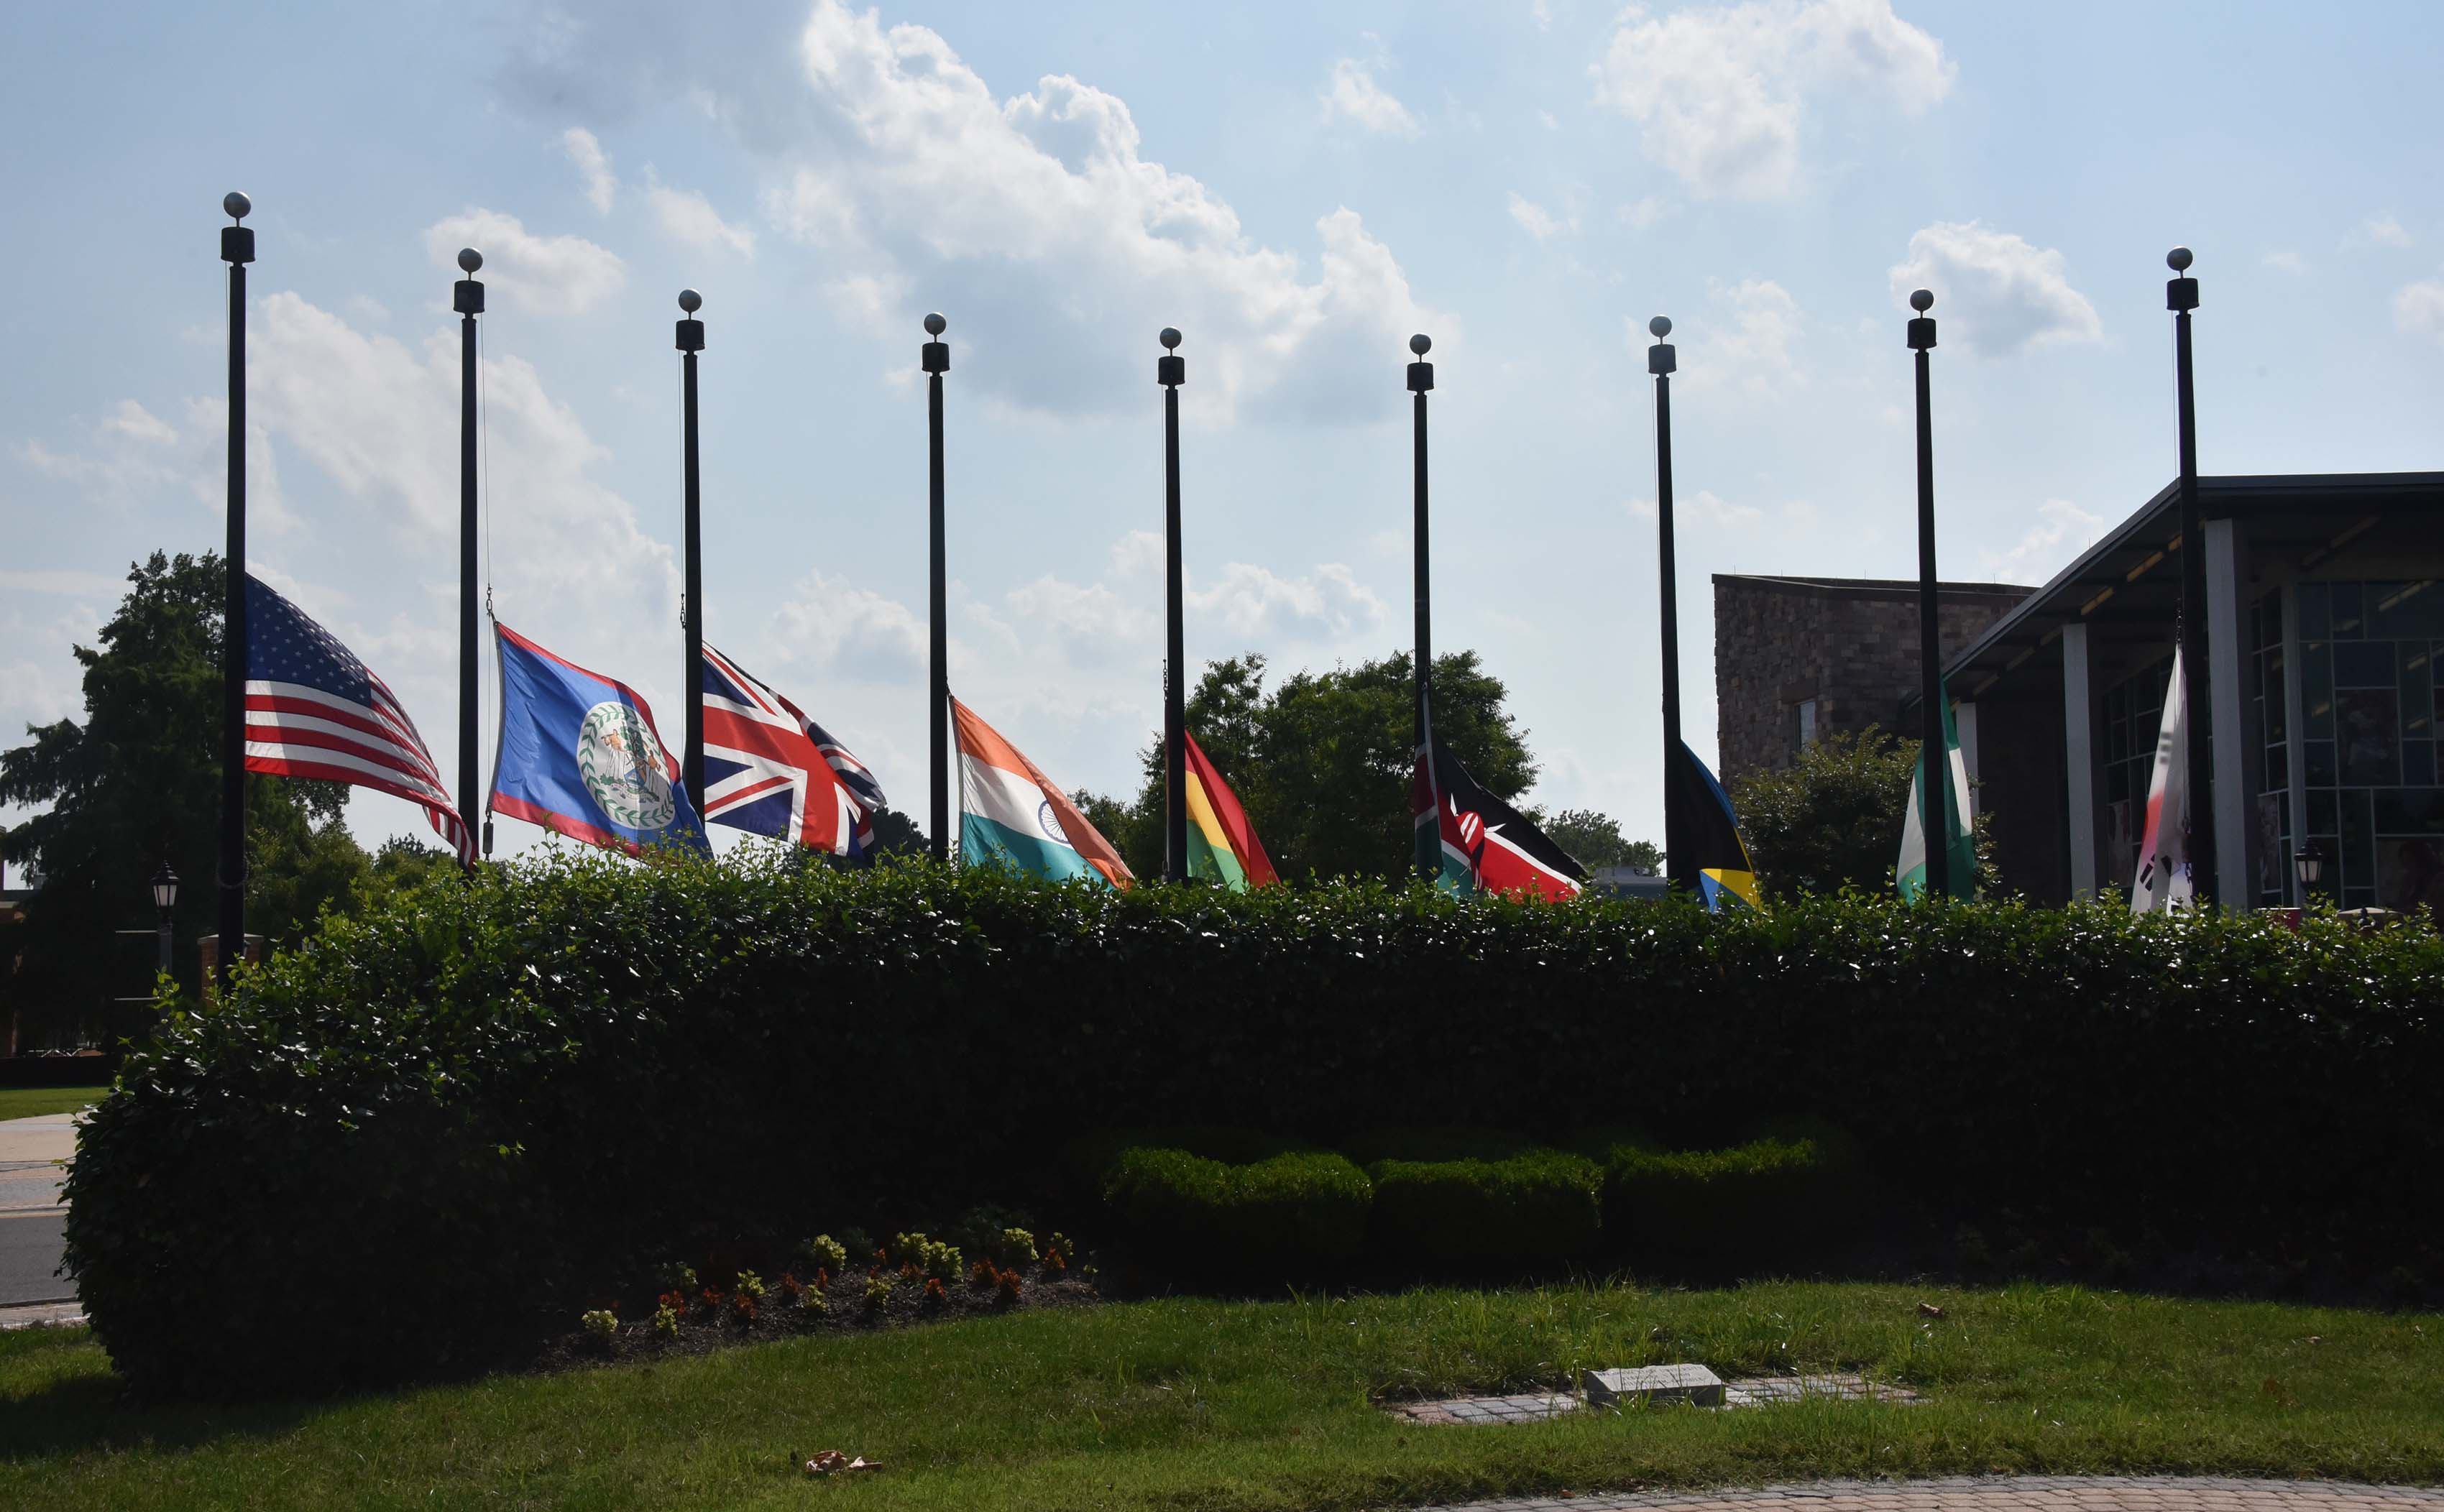 All the flags at Delaware State University were placed at half-mast on July 18 in memorial for the passing of Rev. C.T. Vivian and Congressman John Robert Lewis.